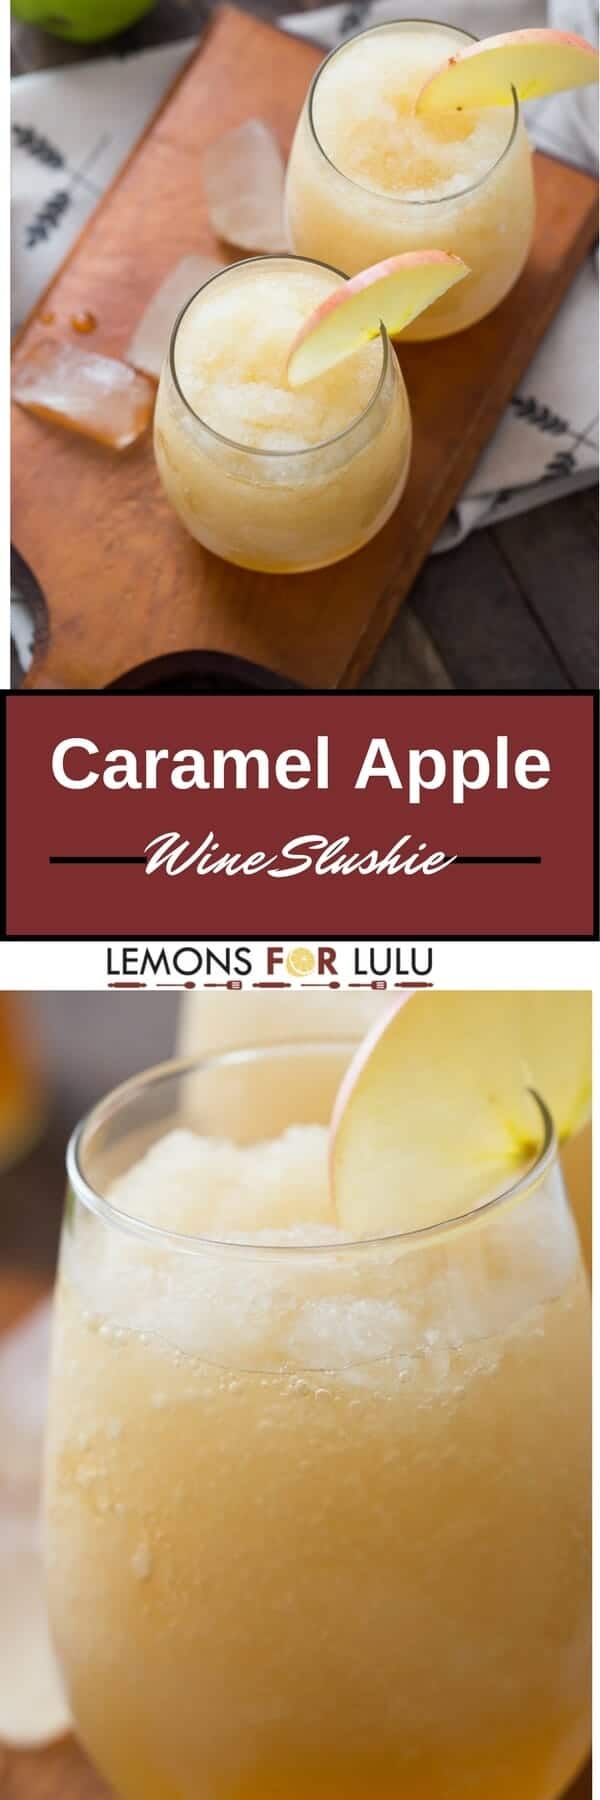 Apple cider and pinot Grigio make one delicious cocktail! You won't even notice the alcohol, just the sweet caramel taste!